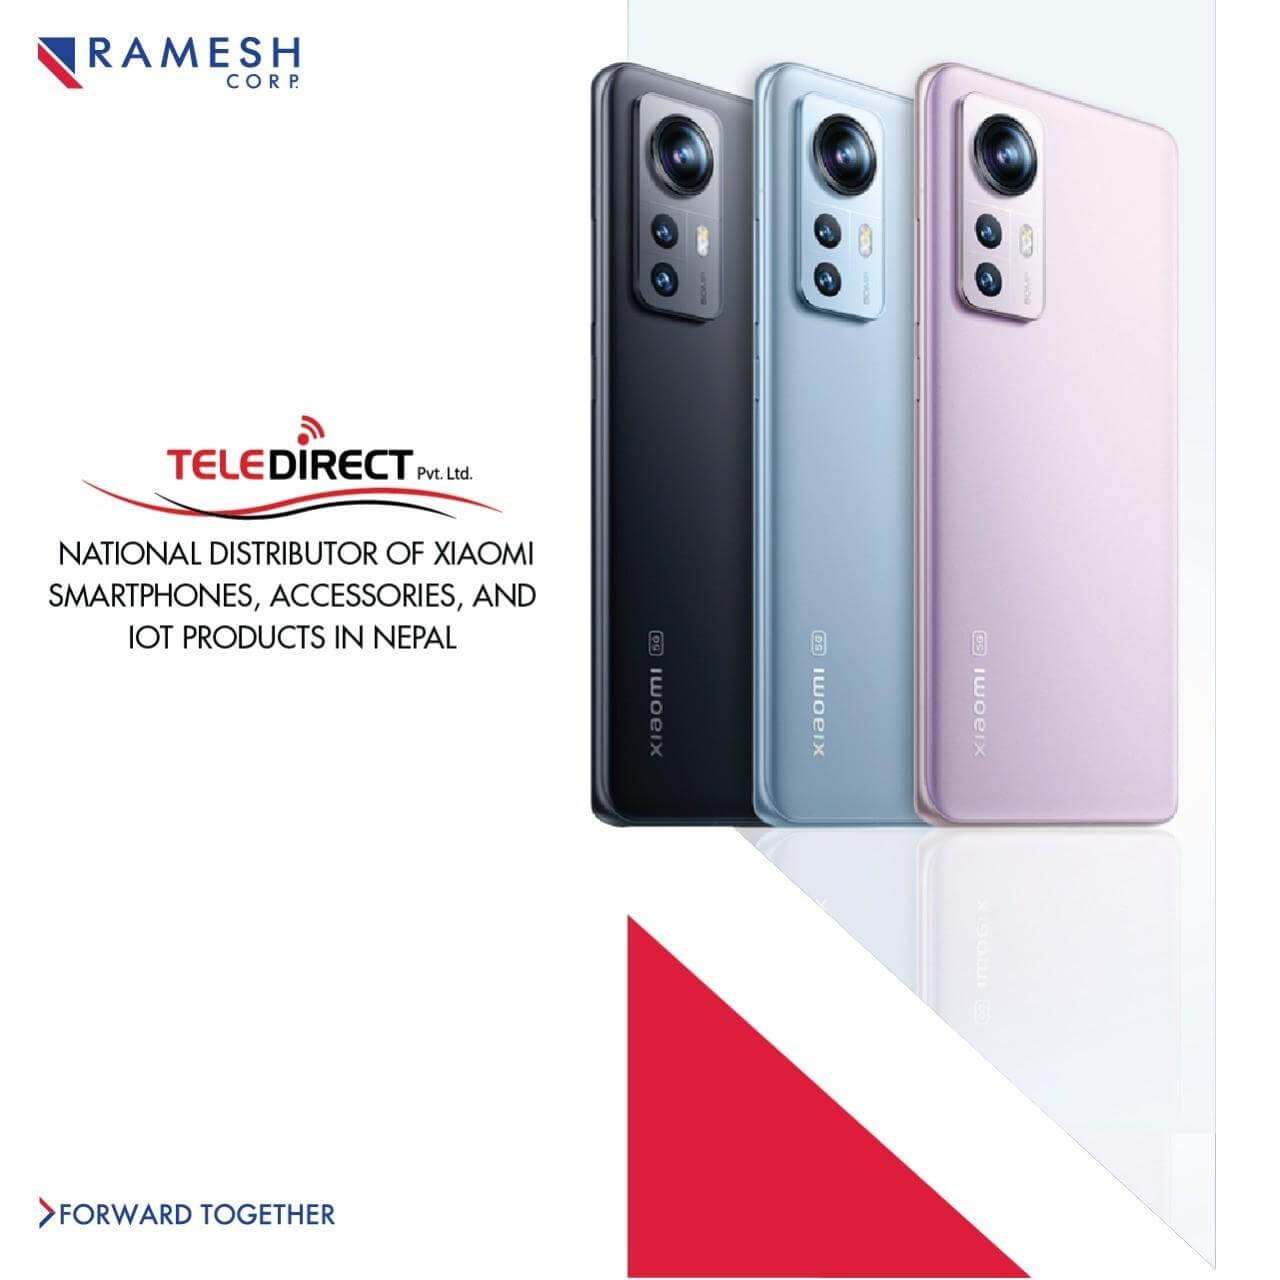 teledirect-pvt-ltd-national-distributor-of-xiaomi-smartphones-accessories-and-iot-products-in-nepal